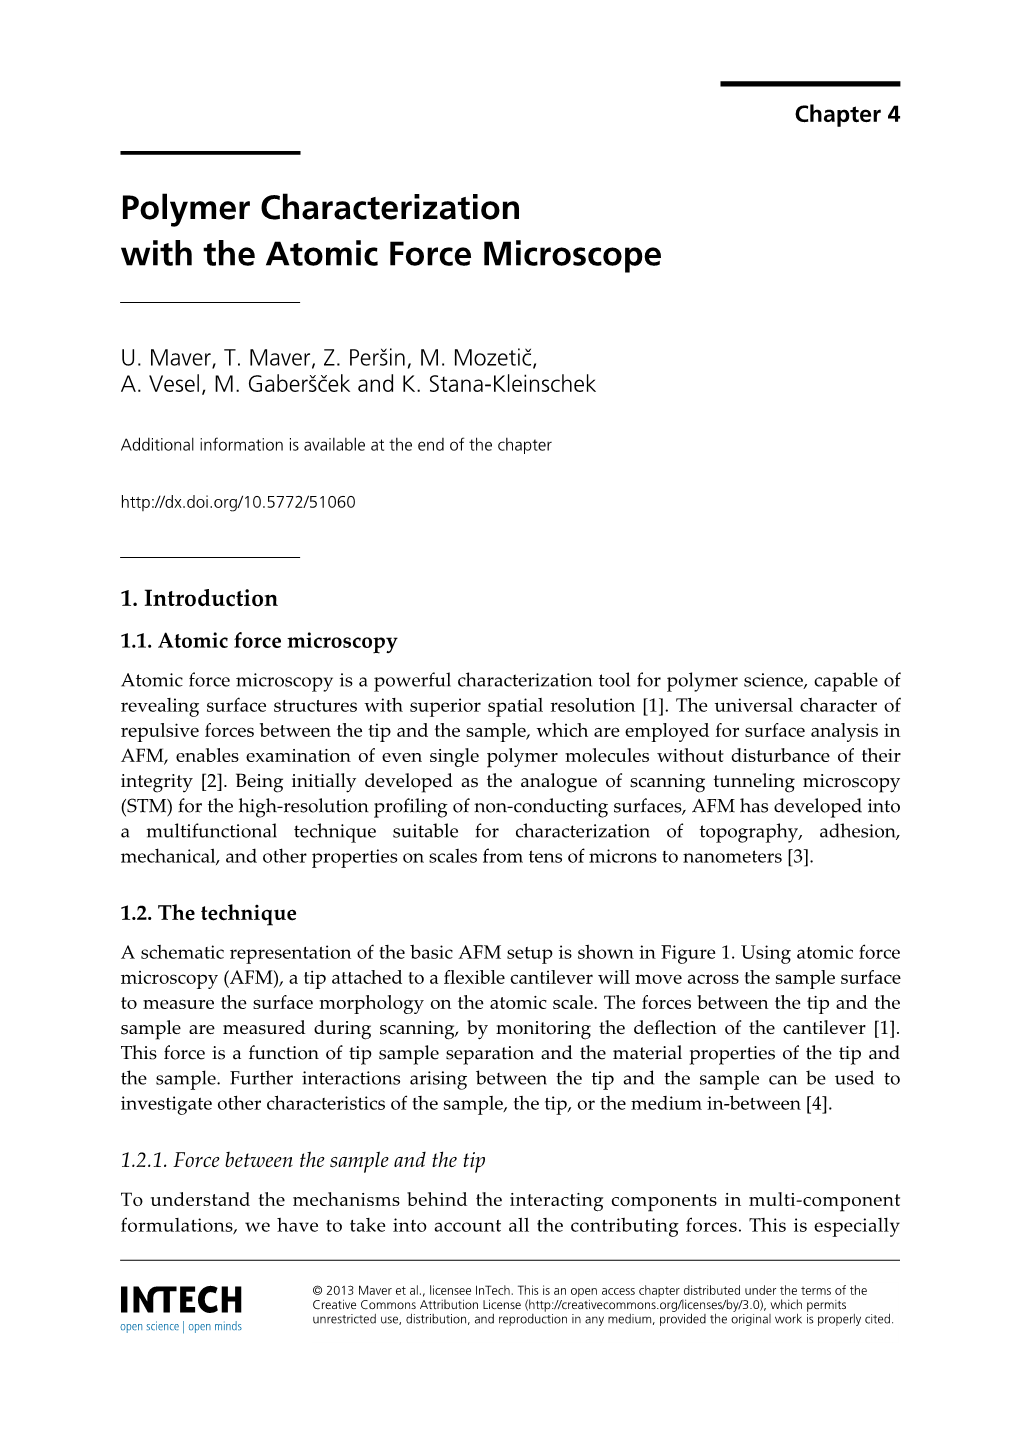 Polymer Characterization with the Atomic Force Microscope